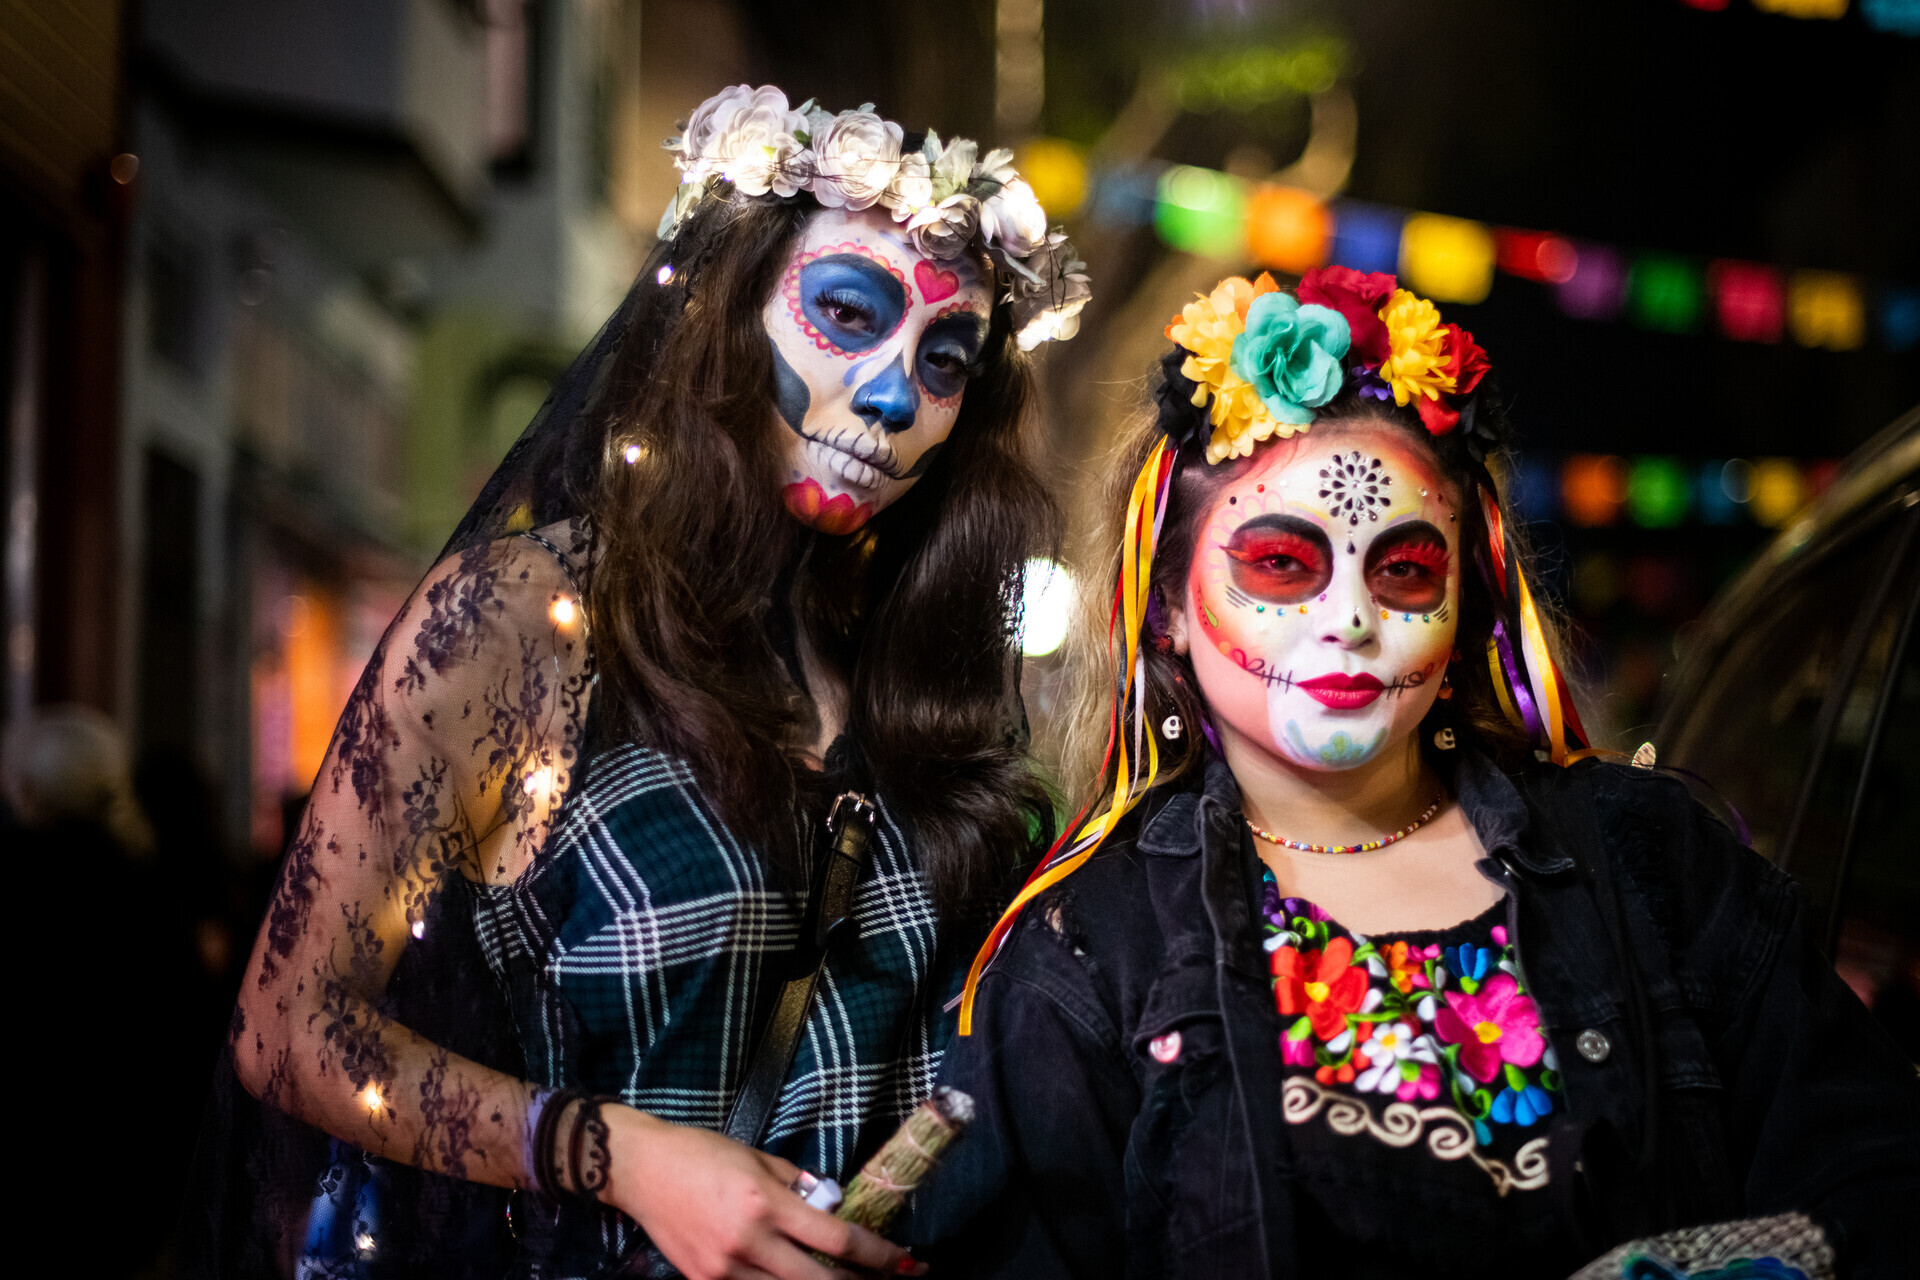 Two people wear face paint and flowers in their hair and look at the camera.